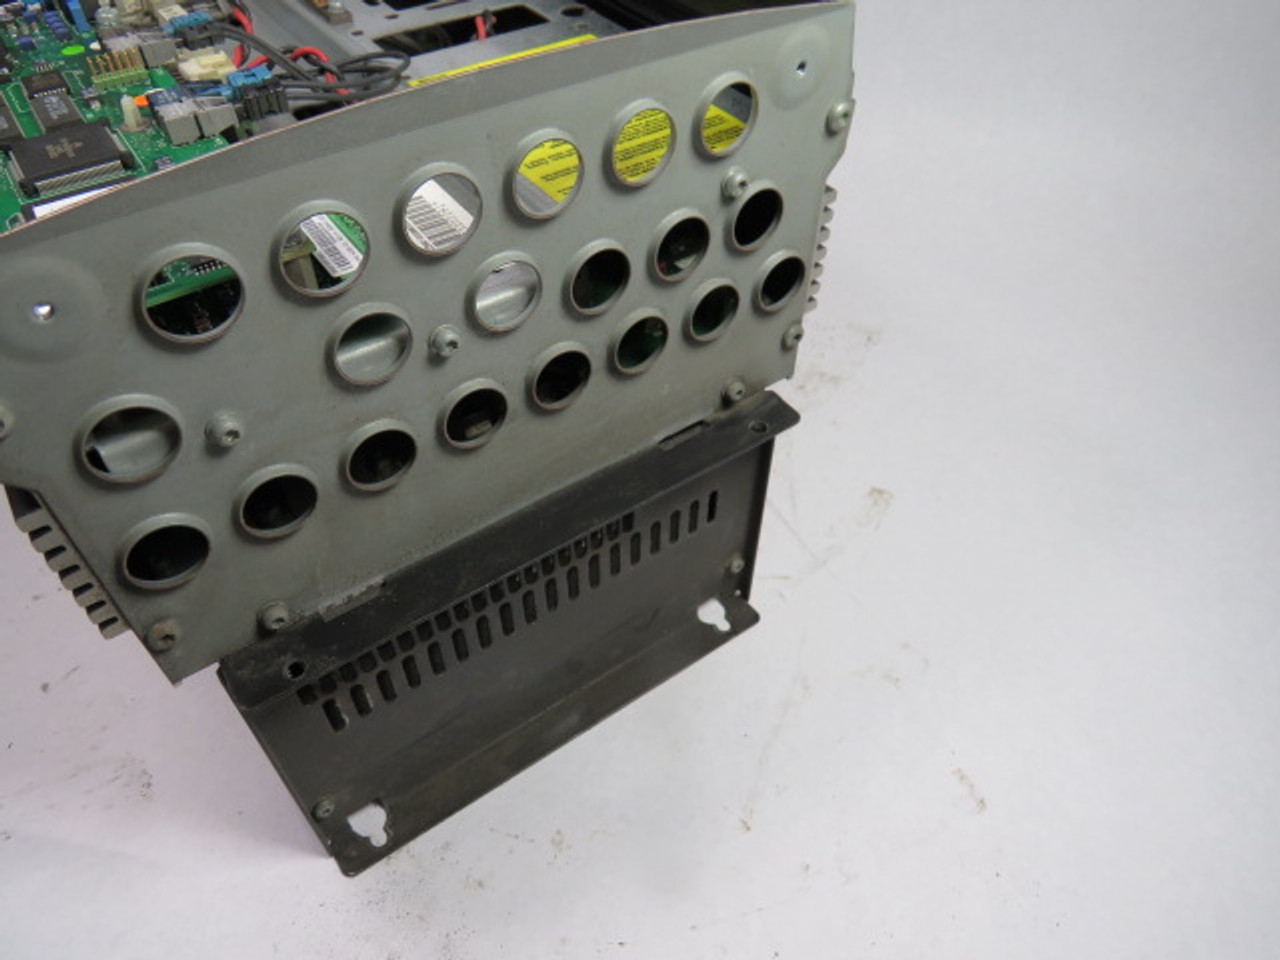 ABB ACS60100096-000B1200901 AC Drive *No Power* * Missing Face Plate ! AS IS !